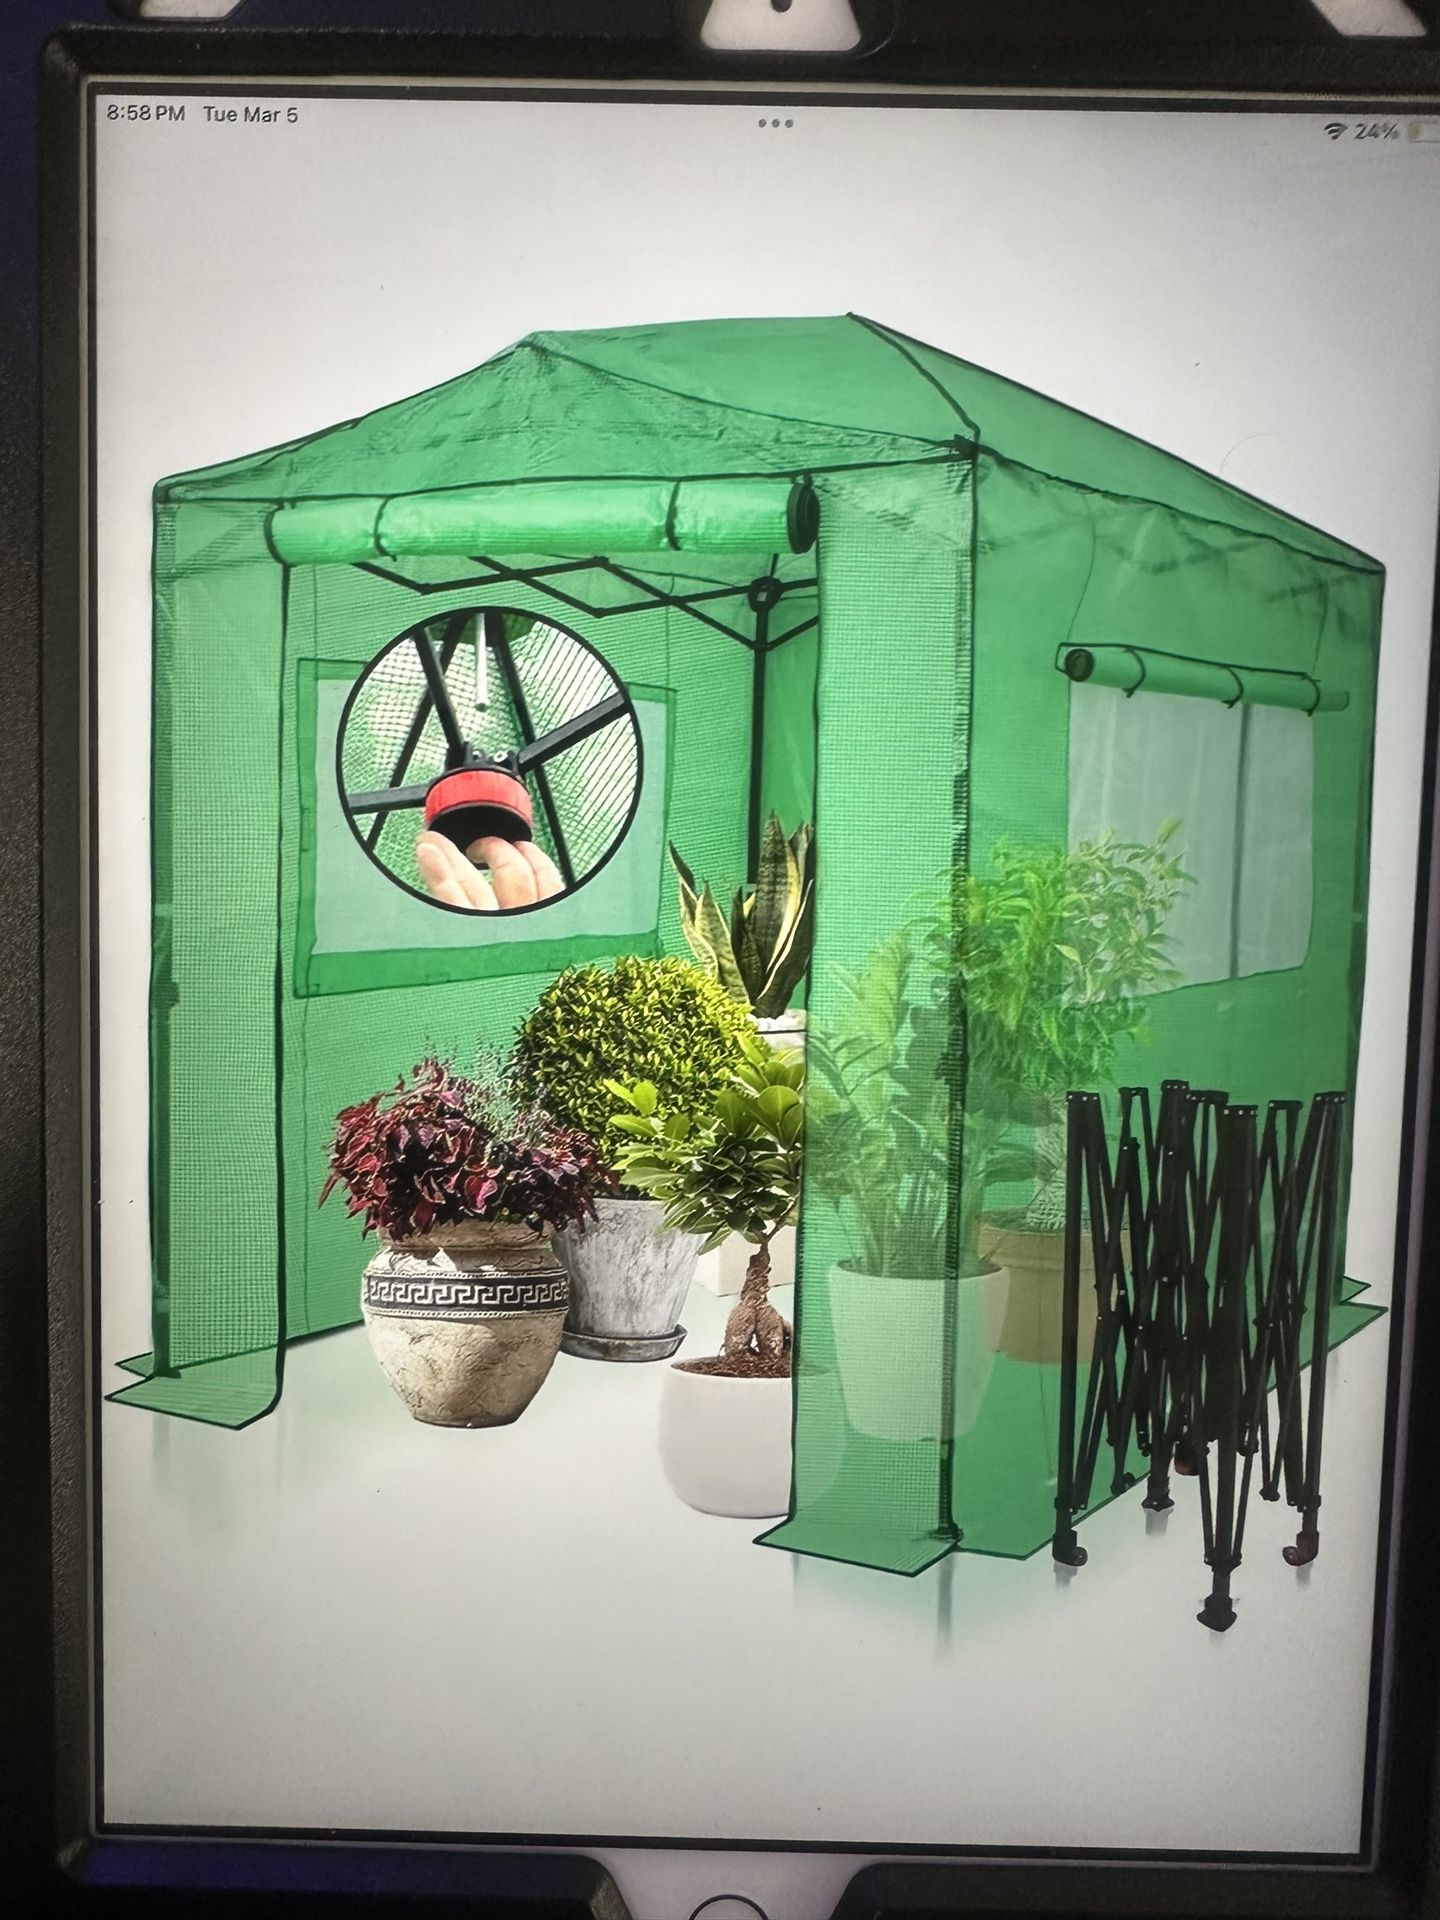 EAGLE PEAK 8x6 Portable Walk-in Greenhouse Instant Pop-up Indoor Outdoor Plant Gardening Green House Canopy, Front and Rear Roll-Up Zipper Entry Doors